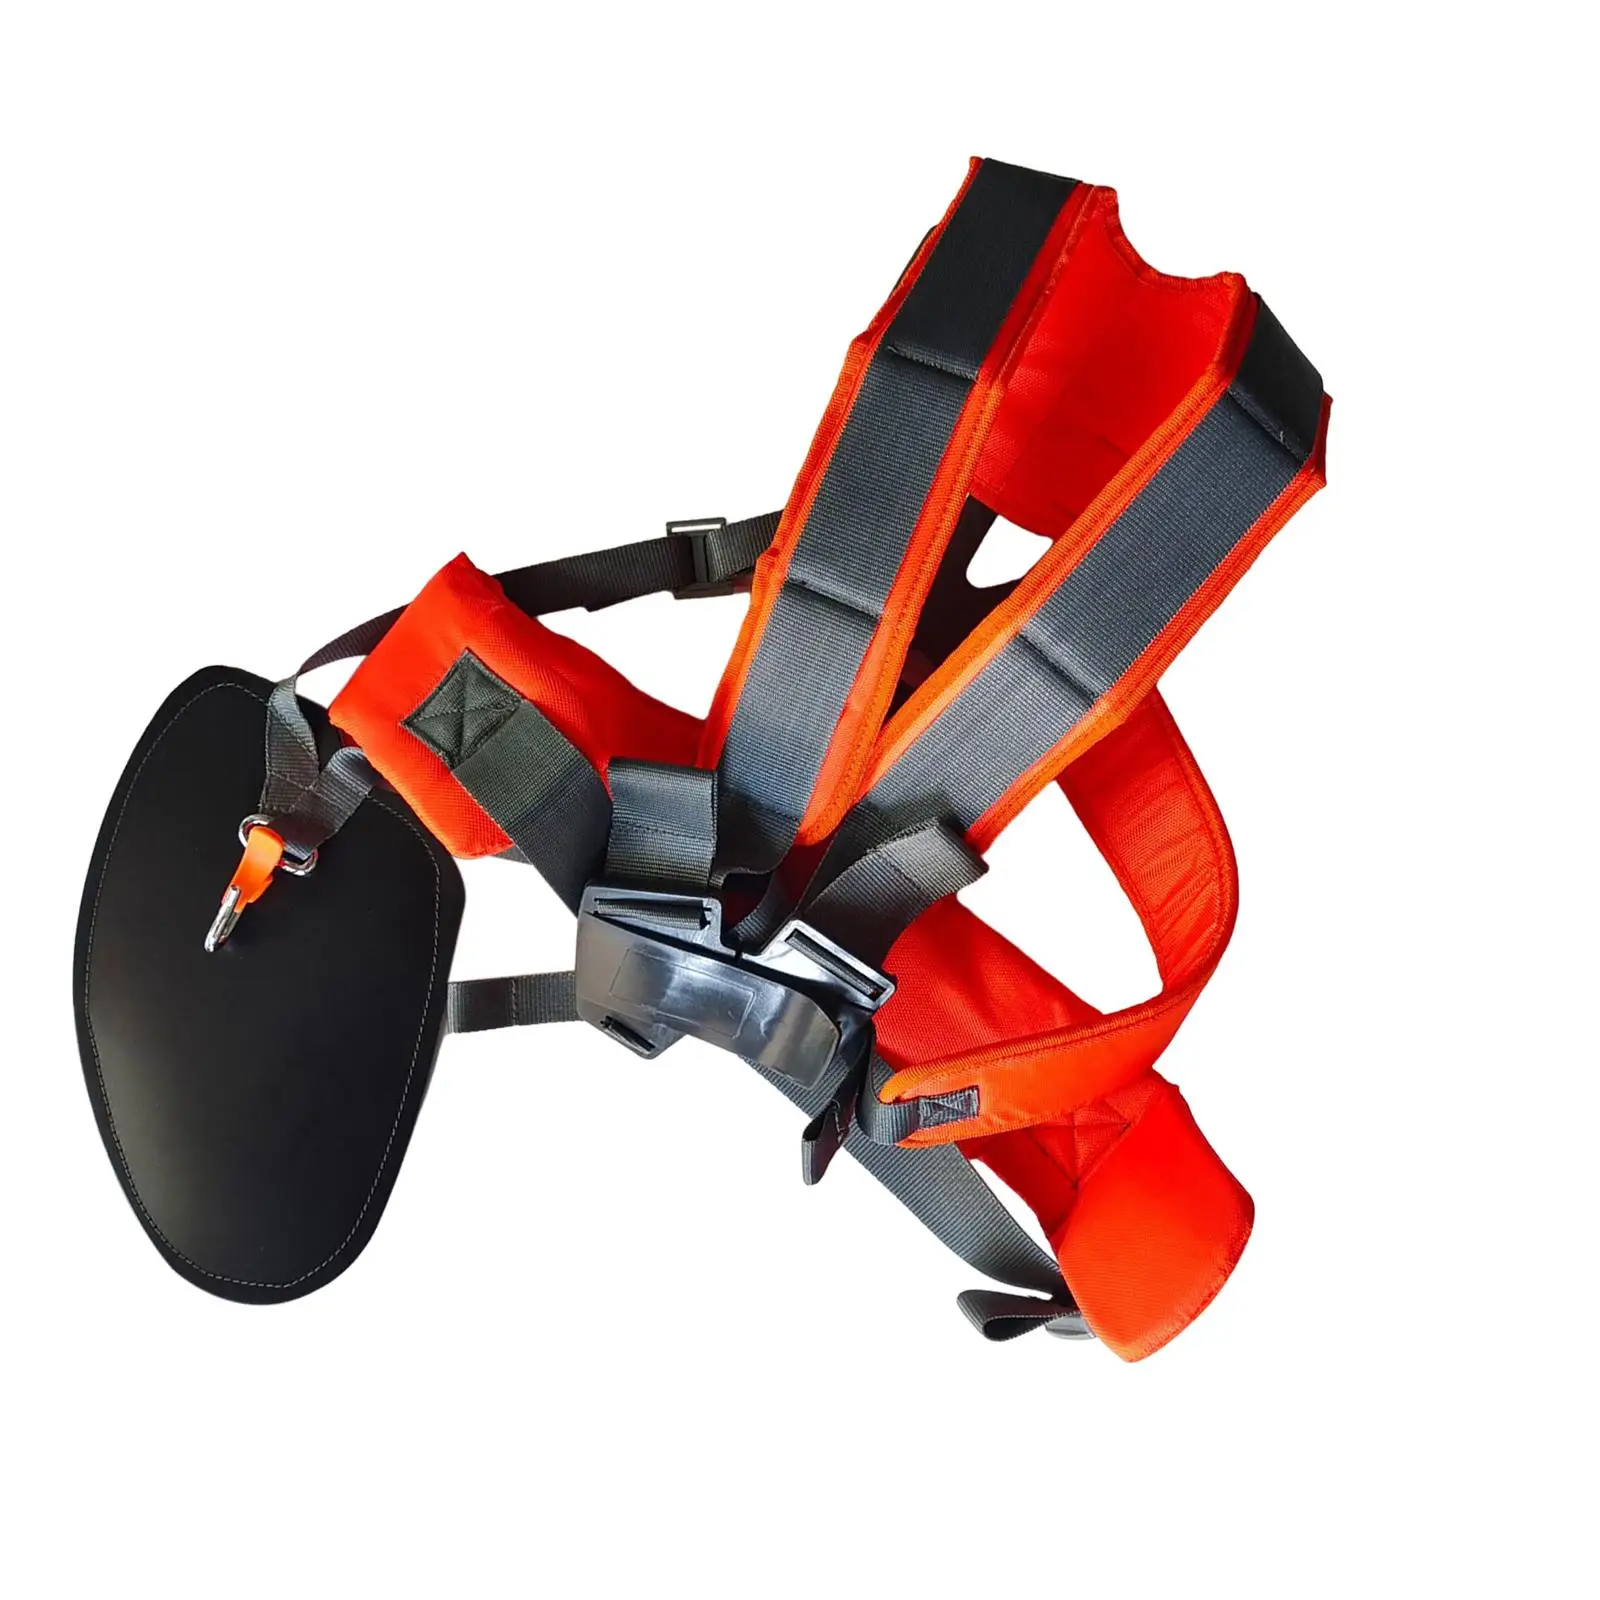 Universal Lawn Trimmer Mower Double Shoulder Strap Orange and Gray Convenient to Wear Oxford Cloth for Agricultural Tool Durable